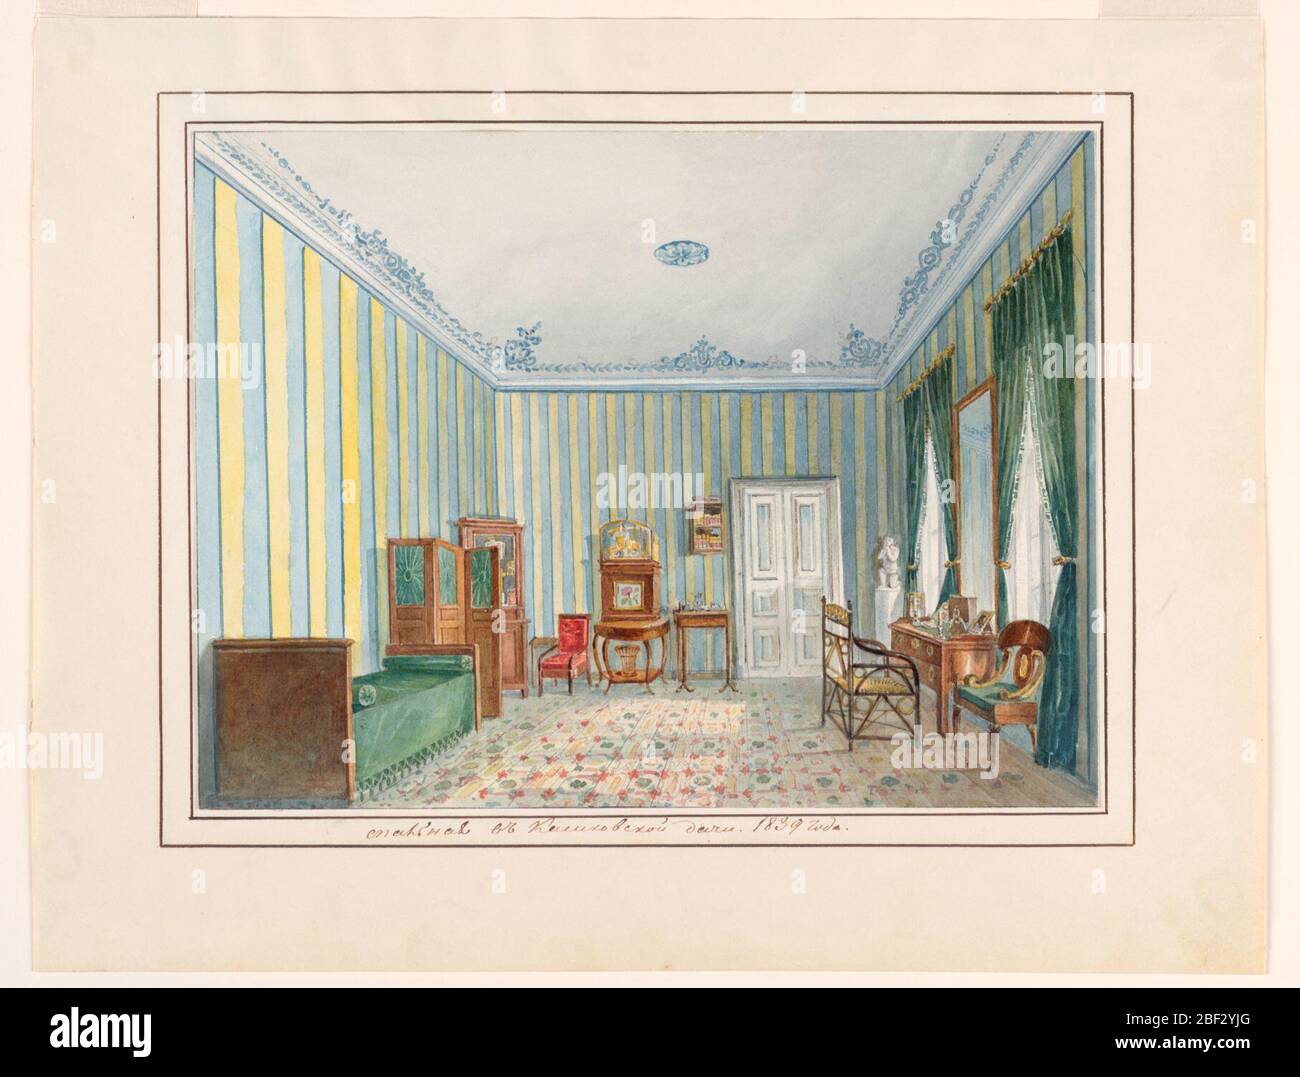 Bedroom in a Country Dacha. The location of this room is identified as the country house of the Kishkovsky family in Russia. The coved ceiling is decorated in a blue design, the walls are papered in yellow and blue stripes and the floor is carpeted in a geometric pattern. Stock Photo